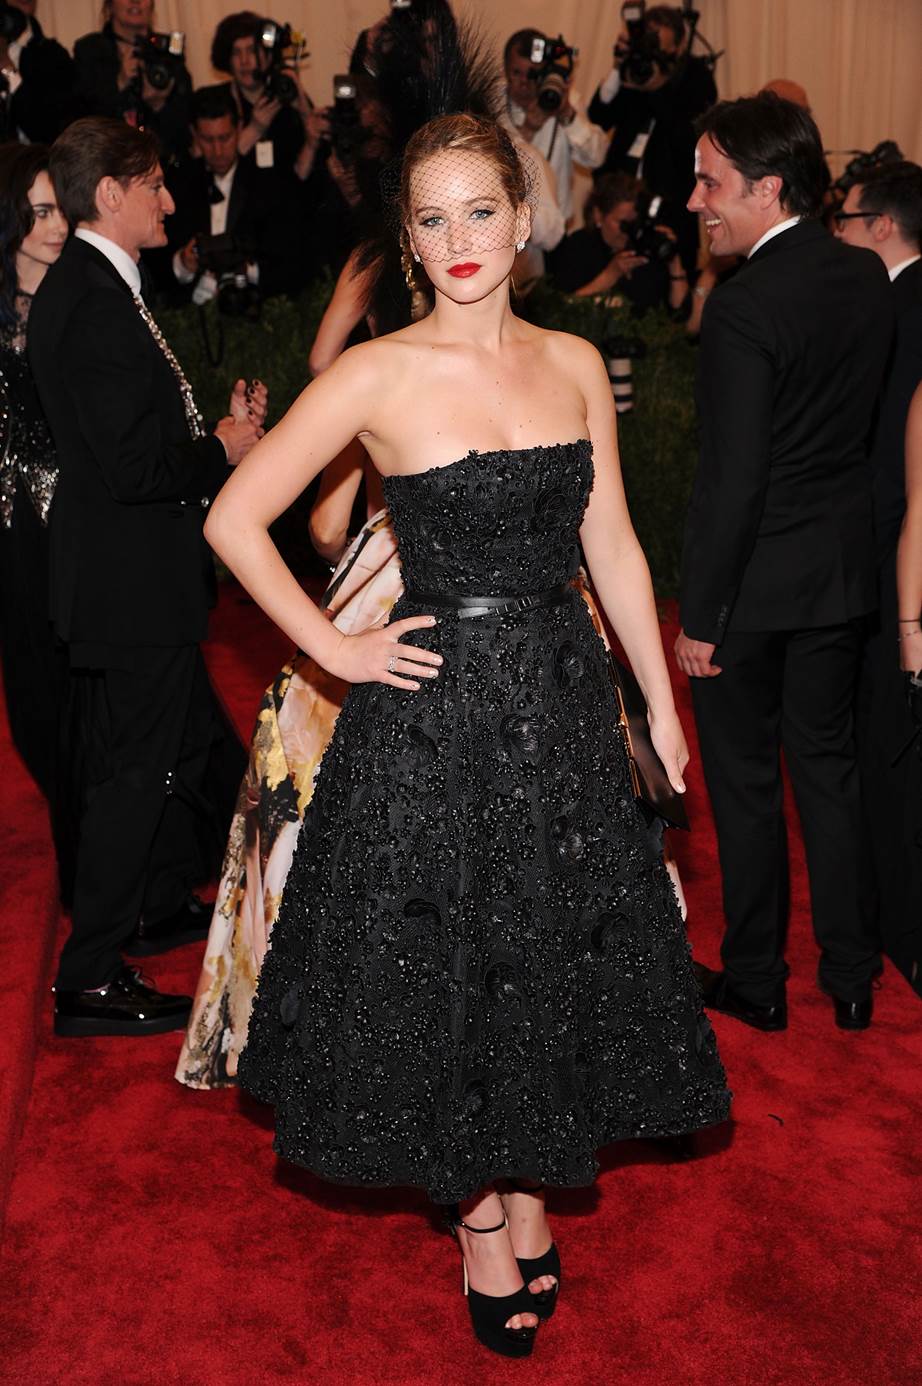 Jennifer Lawrence, 2013 Jennifer Lawrence has a long-standing relationship with fashion house Dior, so it makes sense that she chose to wear the label for her first Met Gala in 2013.